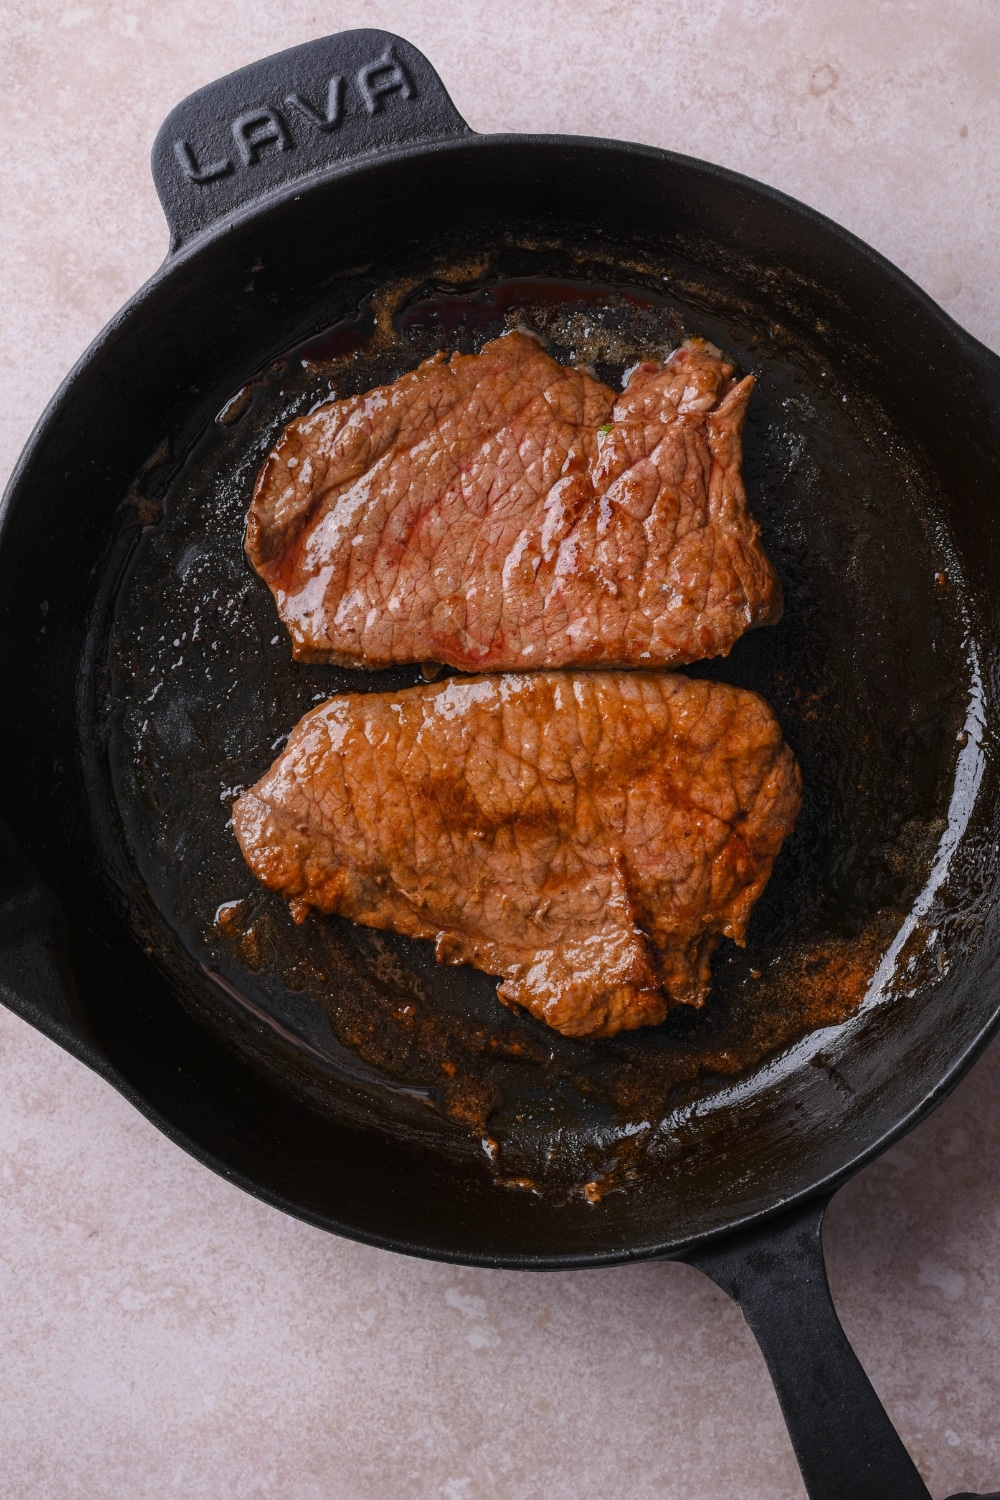 Two pieces of sirloin tip steak on a cast iron pan.